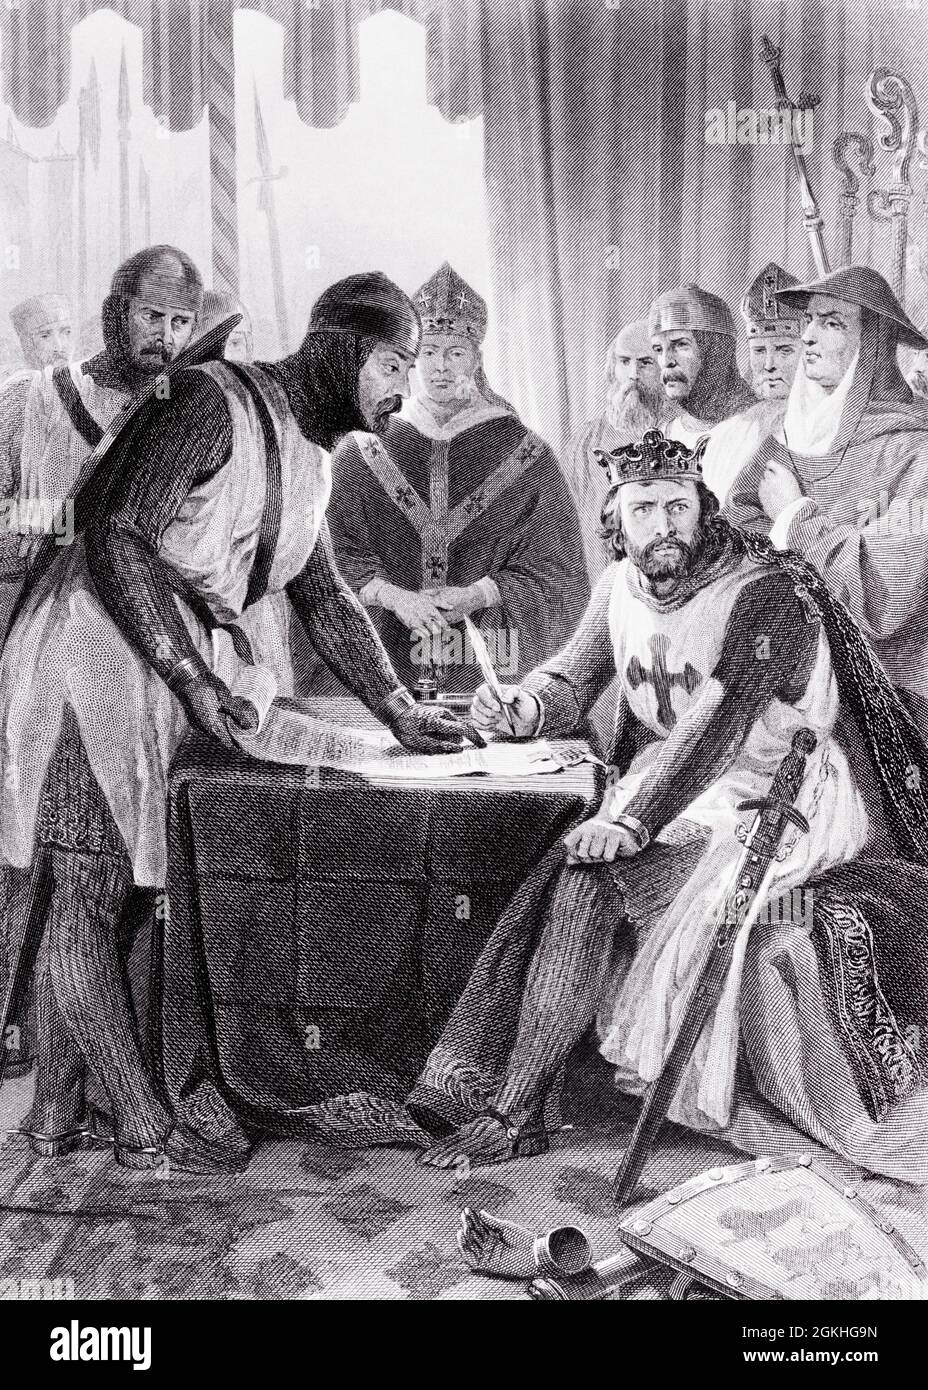 1210s KING JOHN OF ENGLAND SIGNING THE MAGNA CARTA LIBERTATUM ROYAL CHARTER OF RIGHTS AT RUNNYMEDE NEAR WINDSOR JUNE 15 1215 - q55006 CPC001 HARS OLD FASHIONED Stock Photo